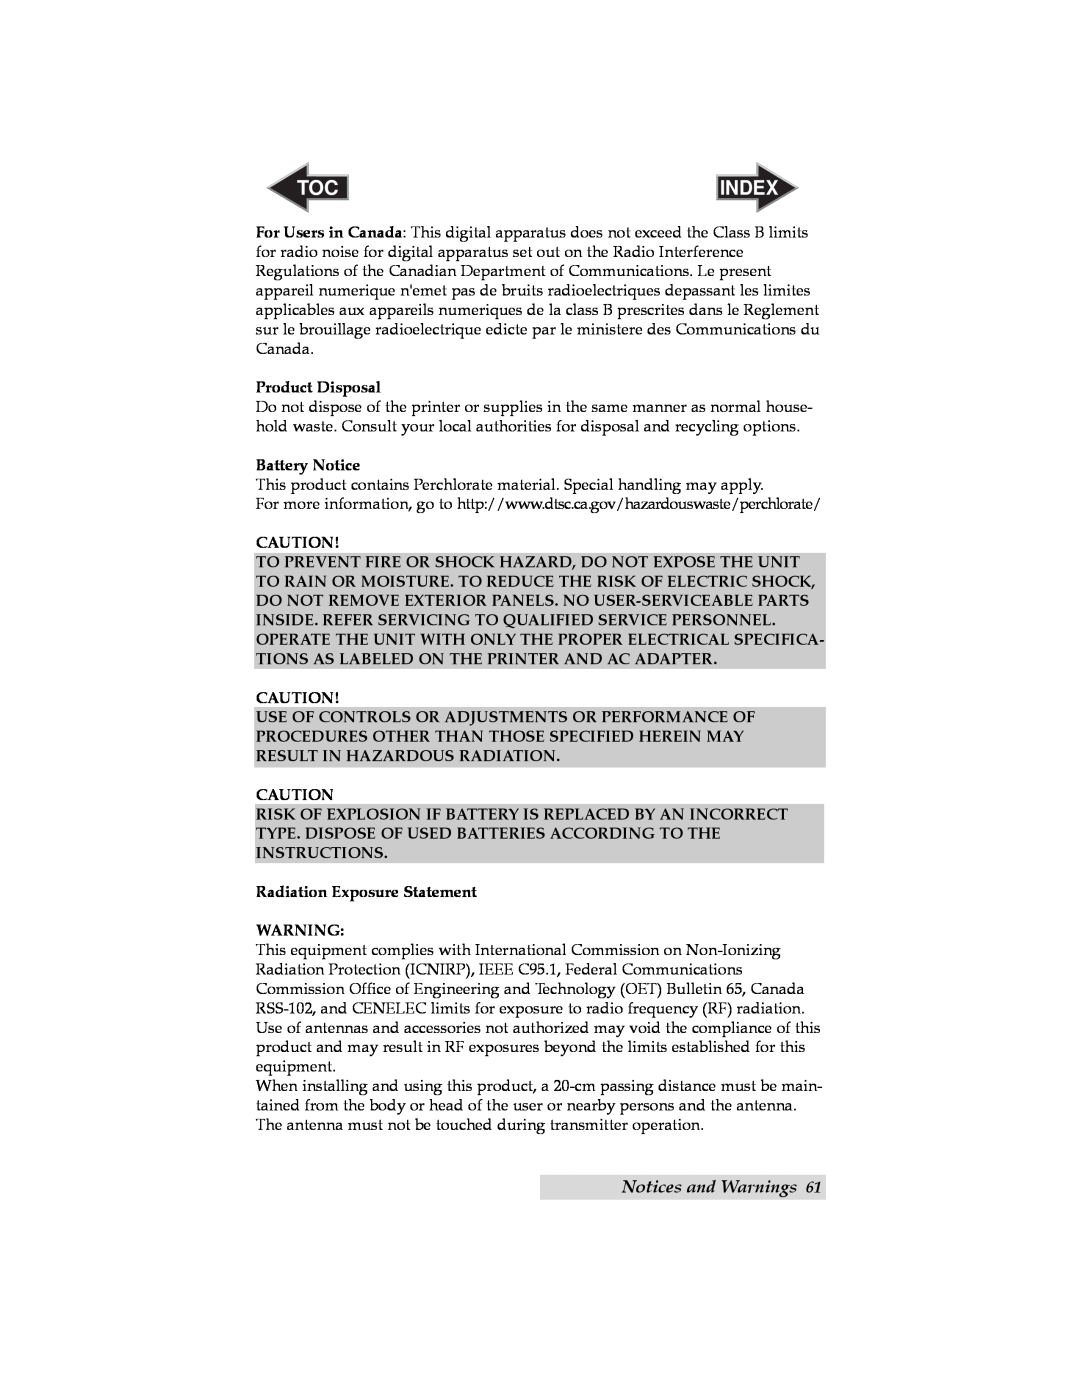 Primera Technology RX900 user manual Notices and Warnings, Index 